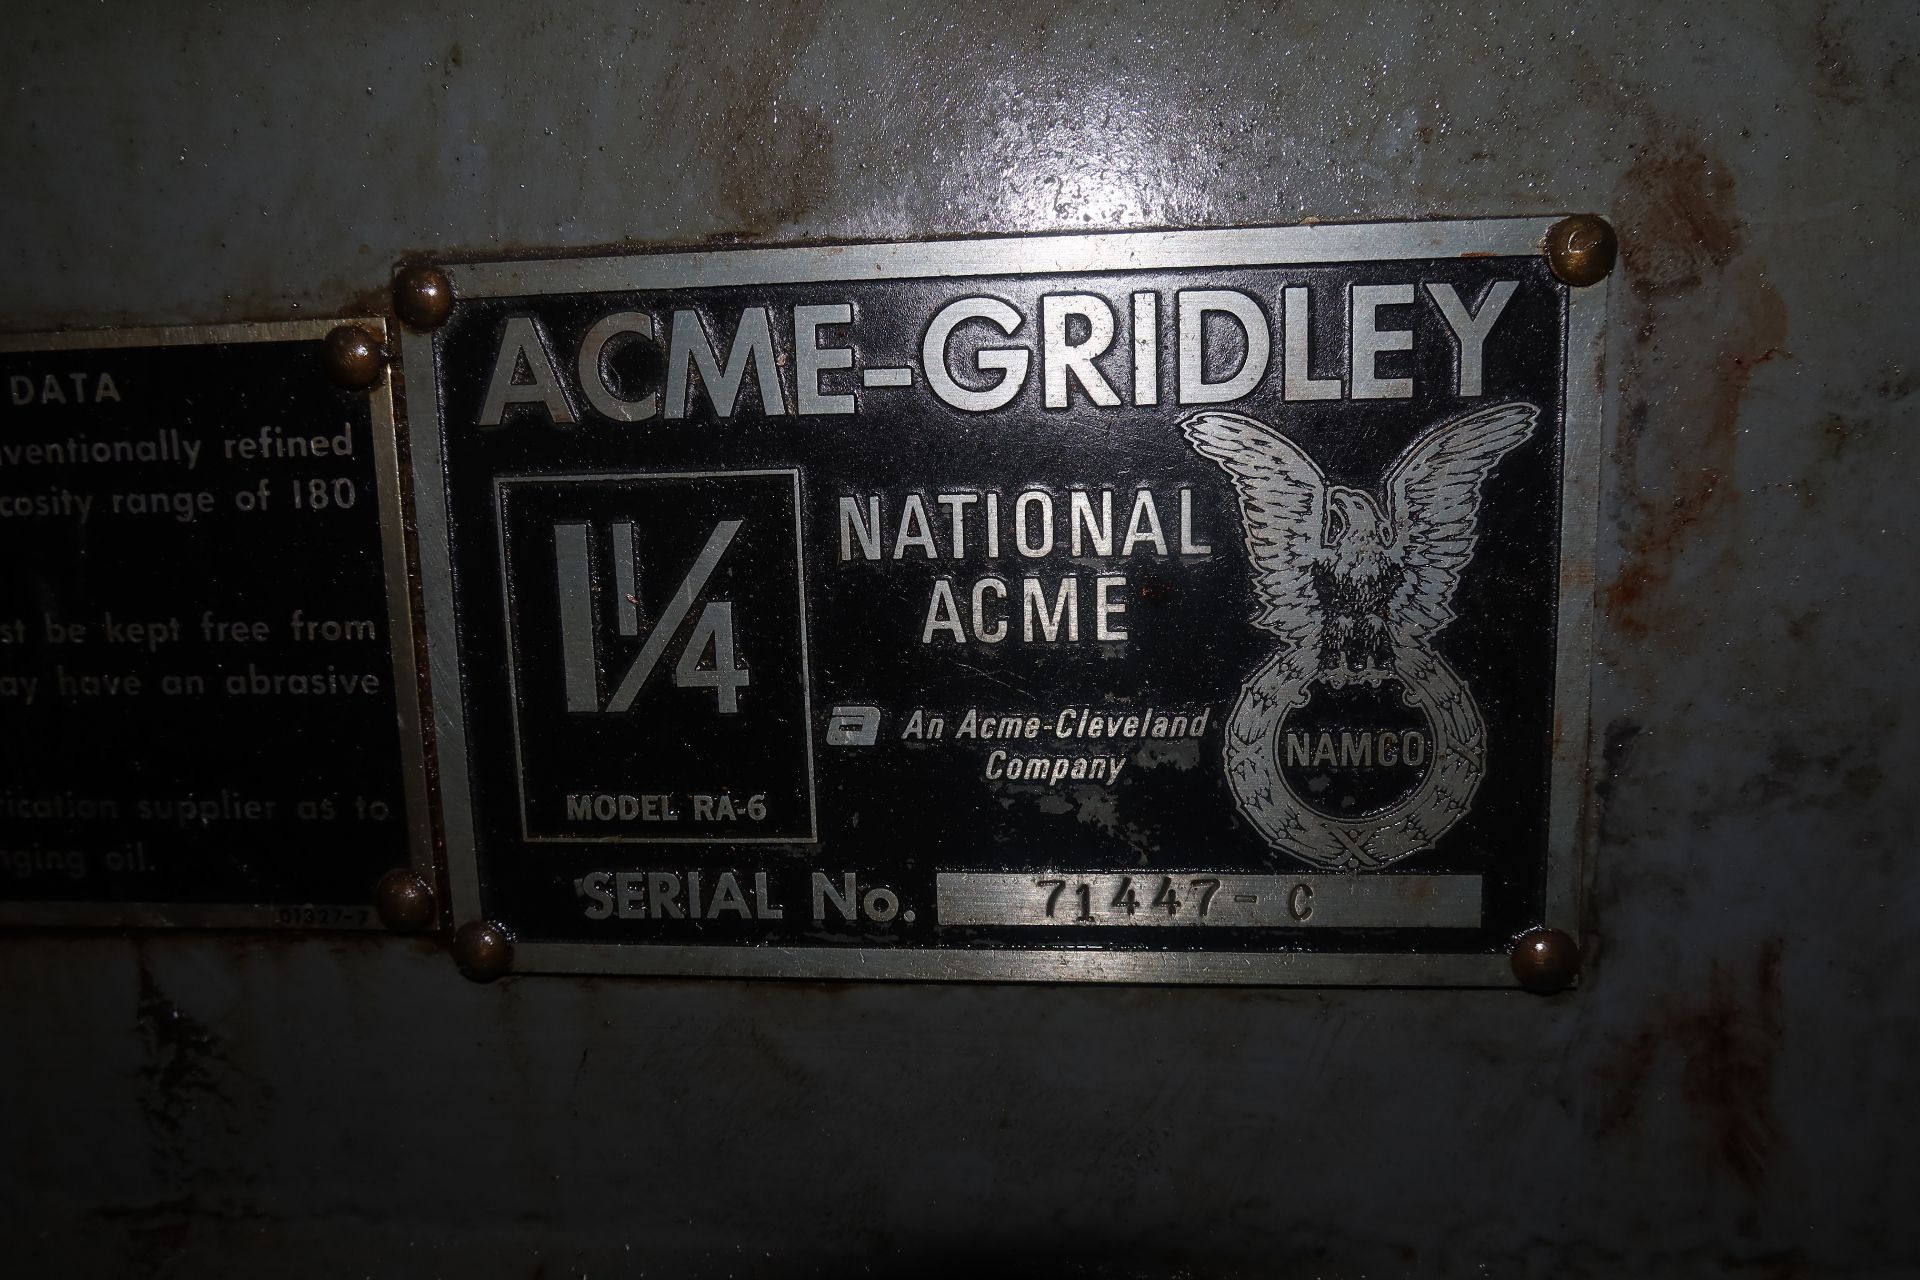 1-1/4" ACME GRIDLEY RA-6 6 SPINDLE AUTOMATIC BAR (SCREW) MACHINE, S/N 71447-C, NEW 1981 - Image 7 of 7